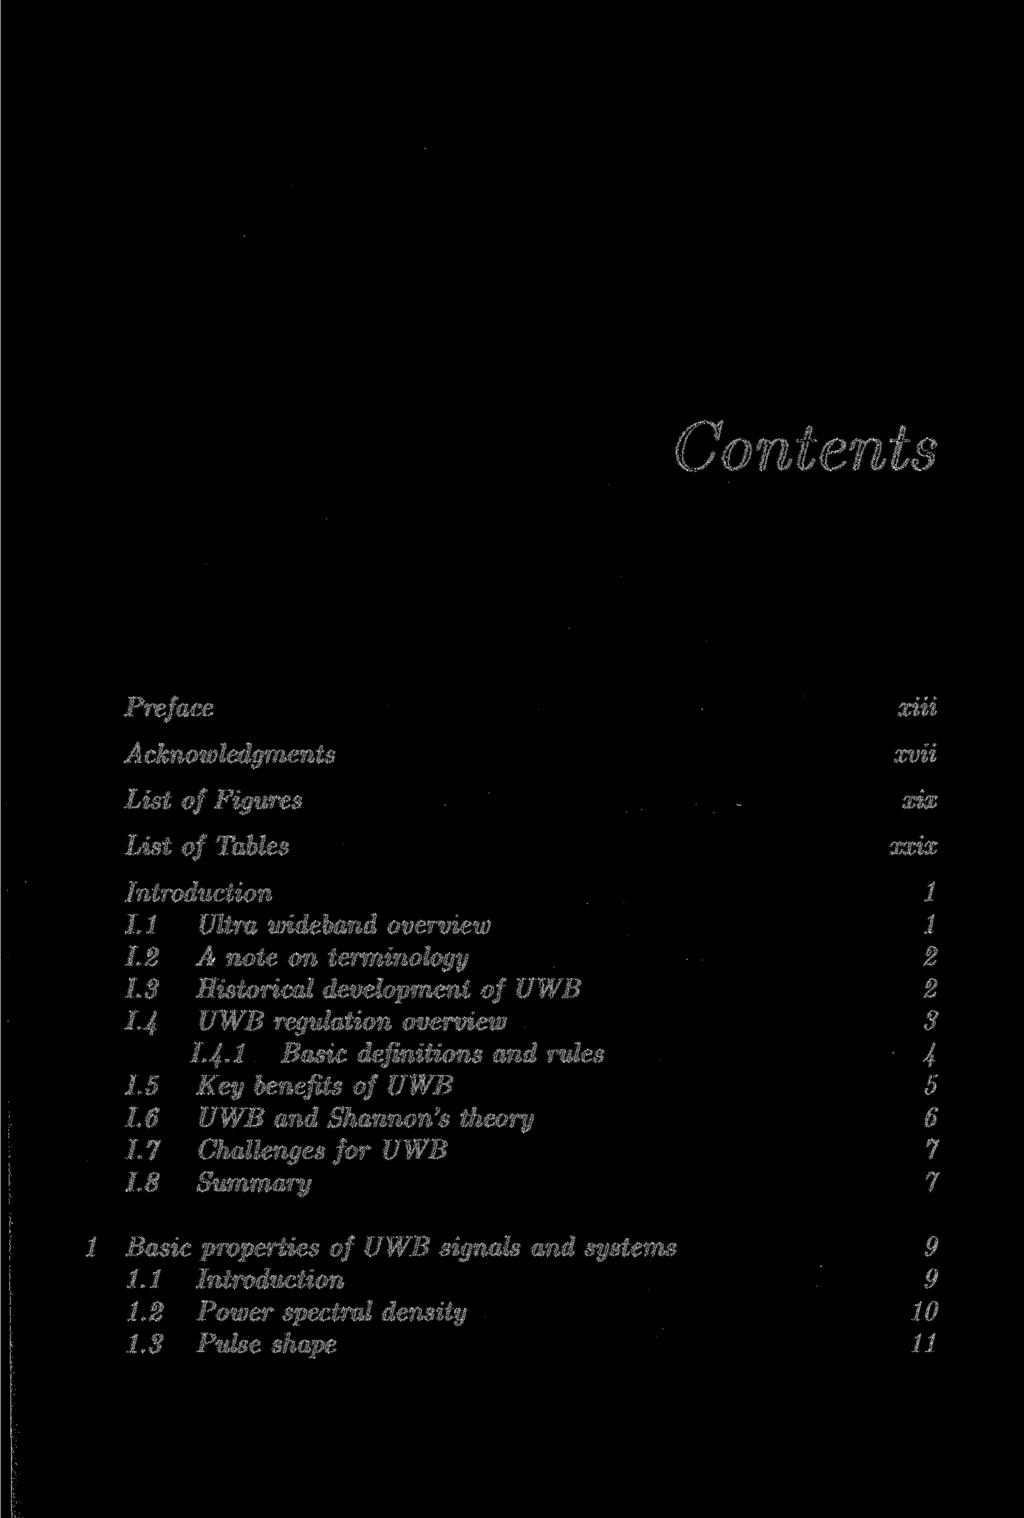 Contents Preface Acknowledgments List of Figures List of Tables Introduction LI Ultra wideband overview 1.2 A note on terminology 1.3 Historical development of UWB 1.4 UWB regulation overview 1.